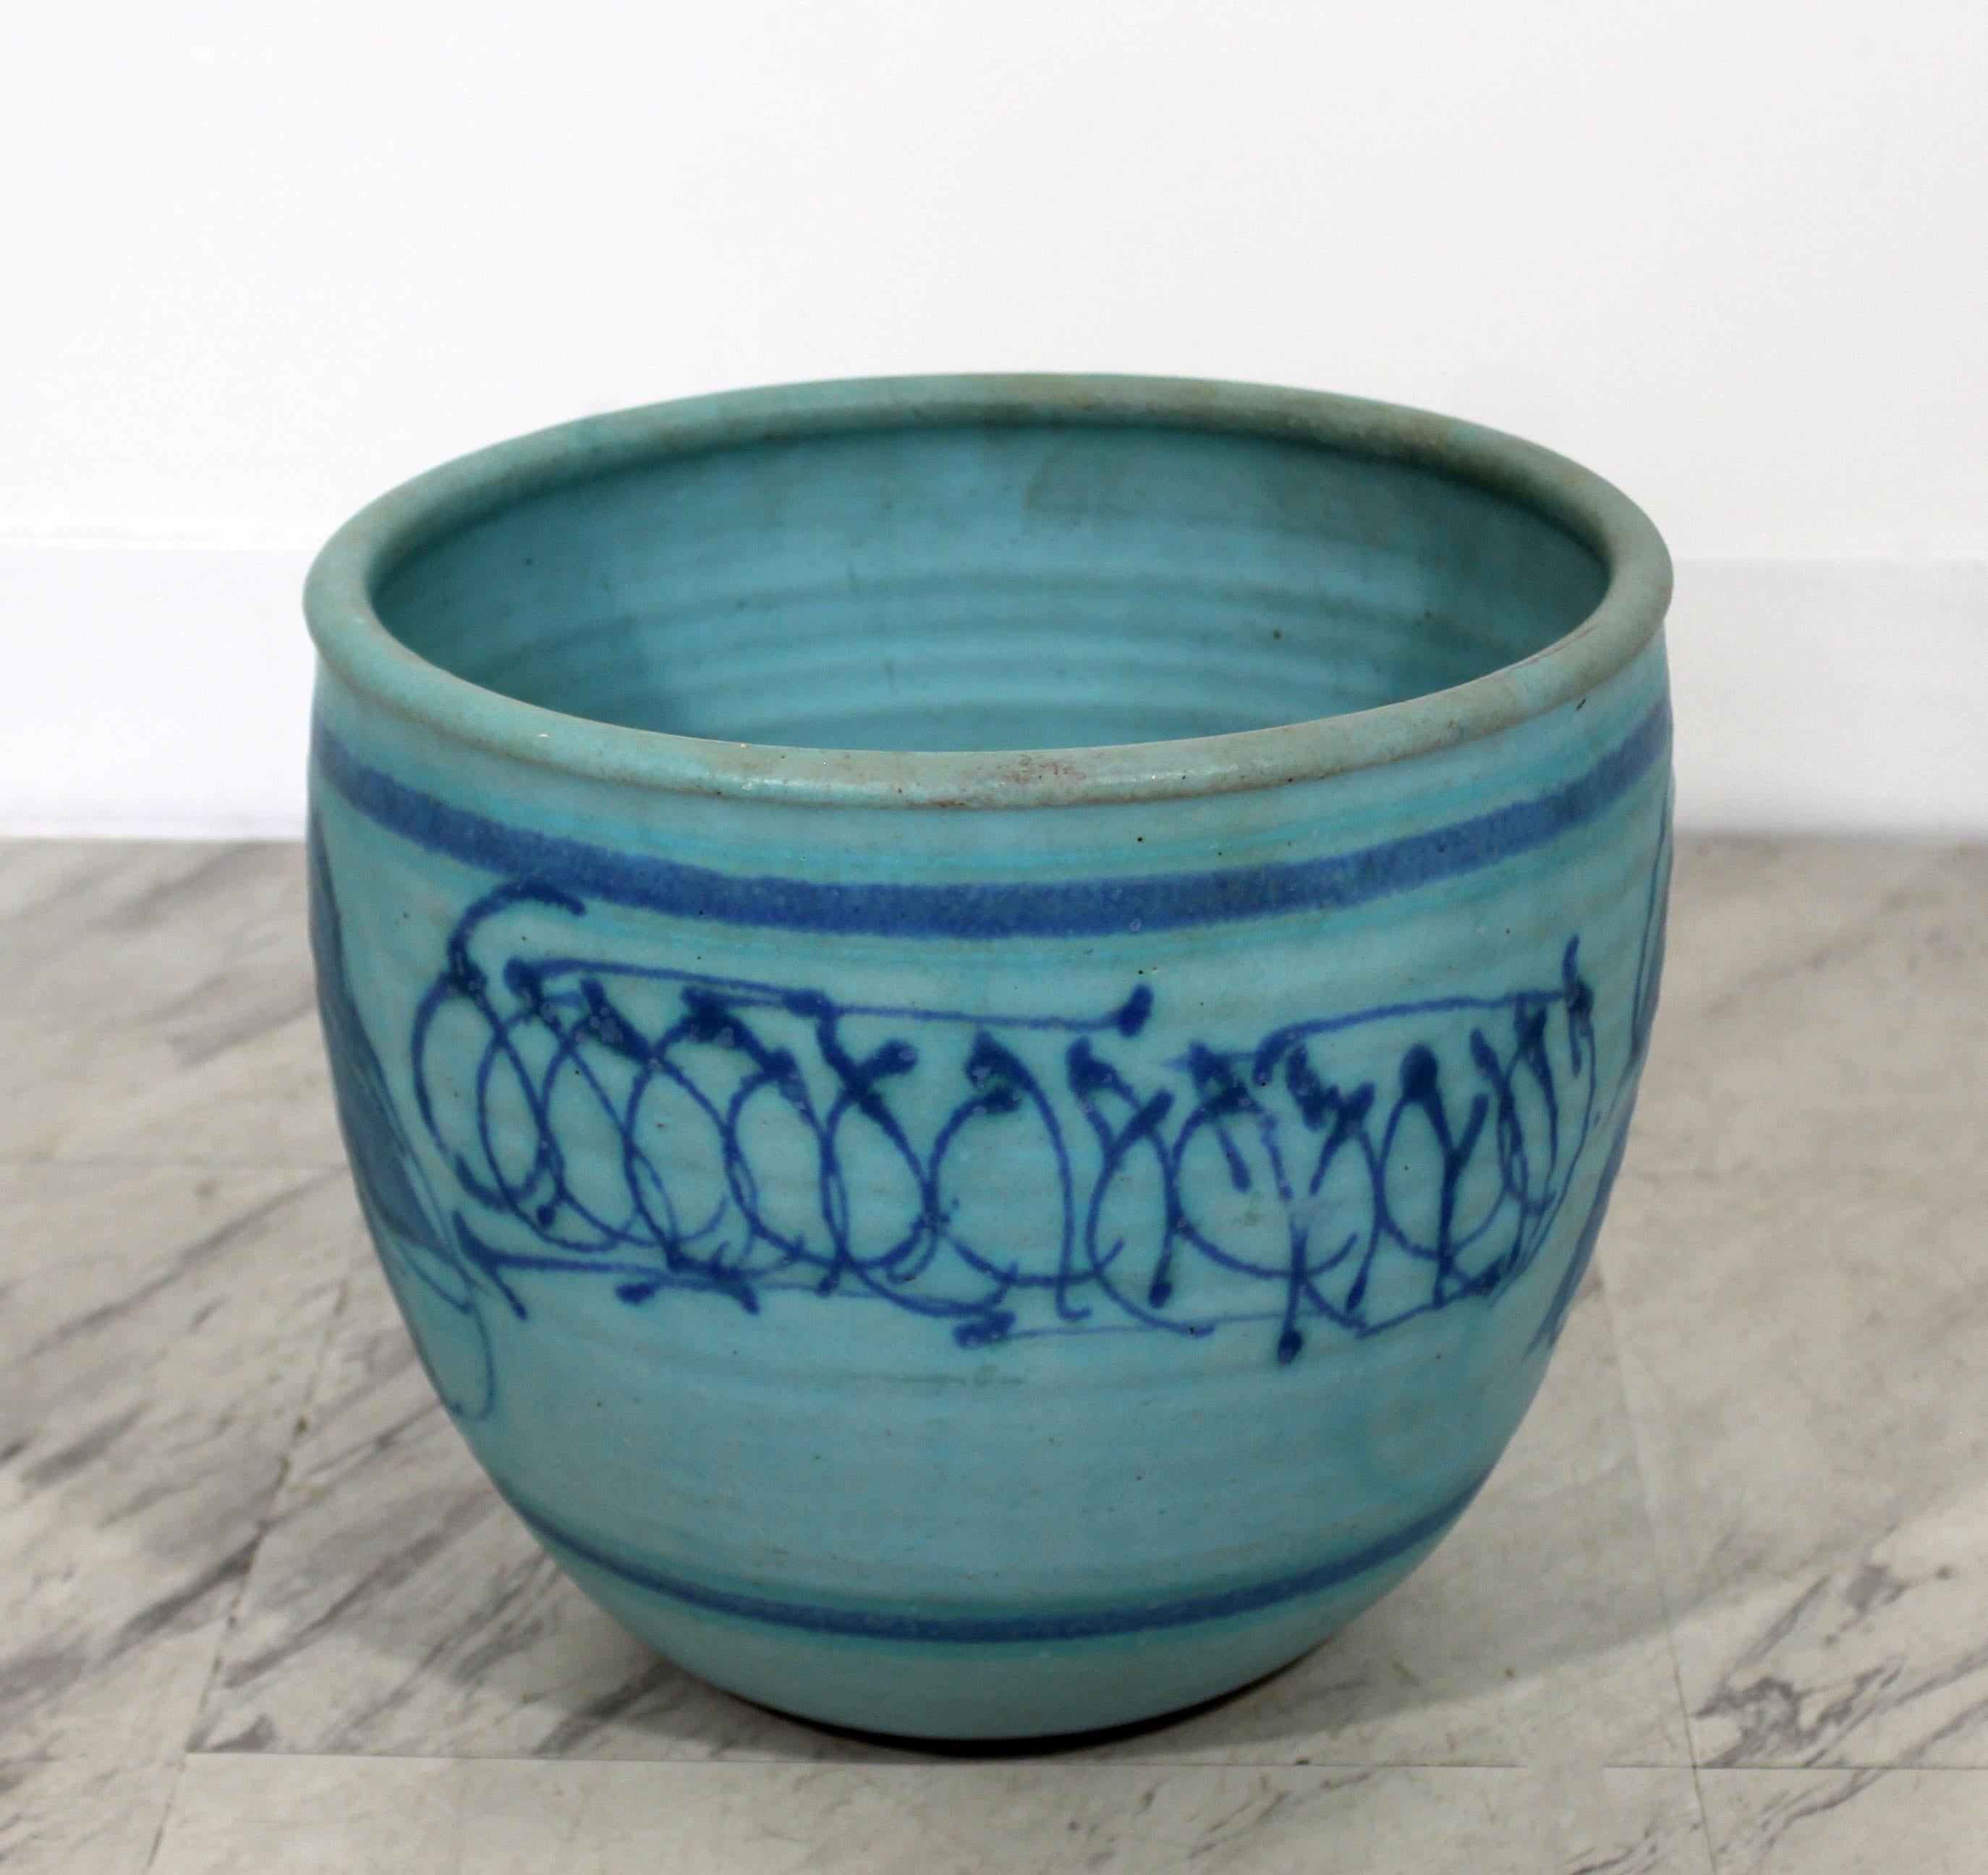 For your consideration is an rare exquisite, blue glazed ceramic pot, signed by J.T. Abernathy, circa 1960s. Cranbrook Studio artist. In excellent condition. The dimensions are 10.5